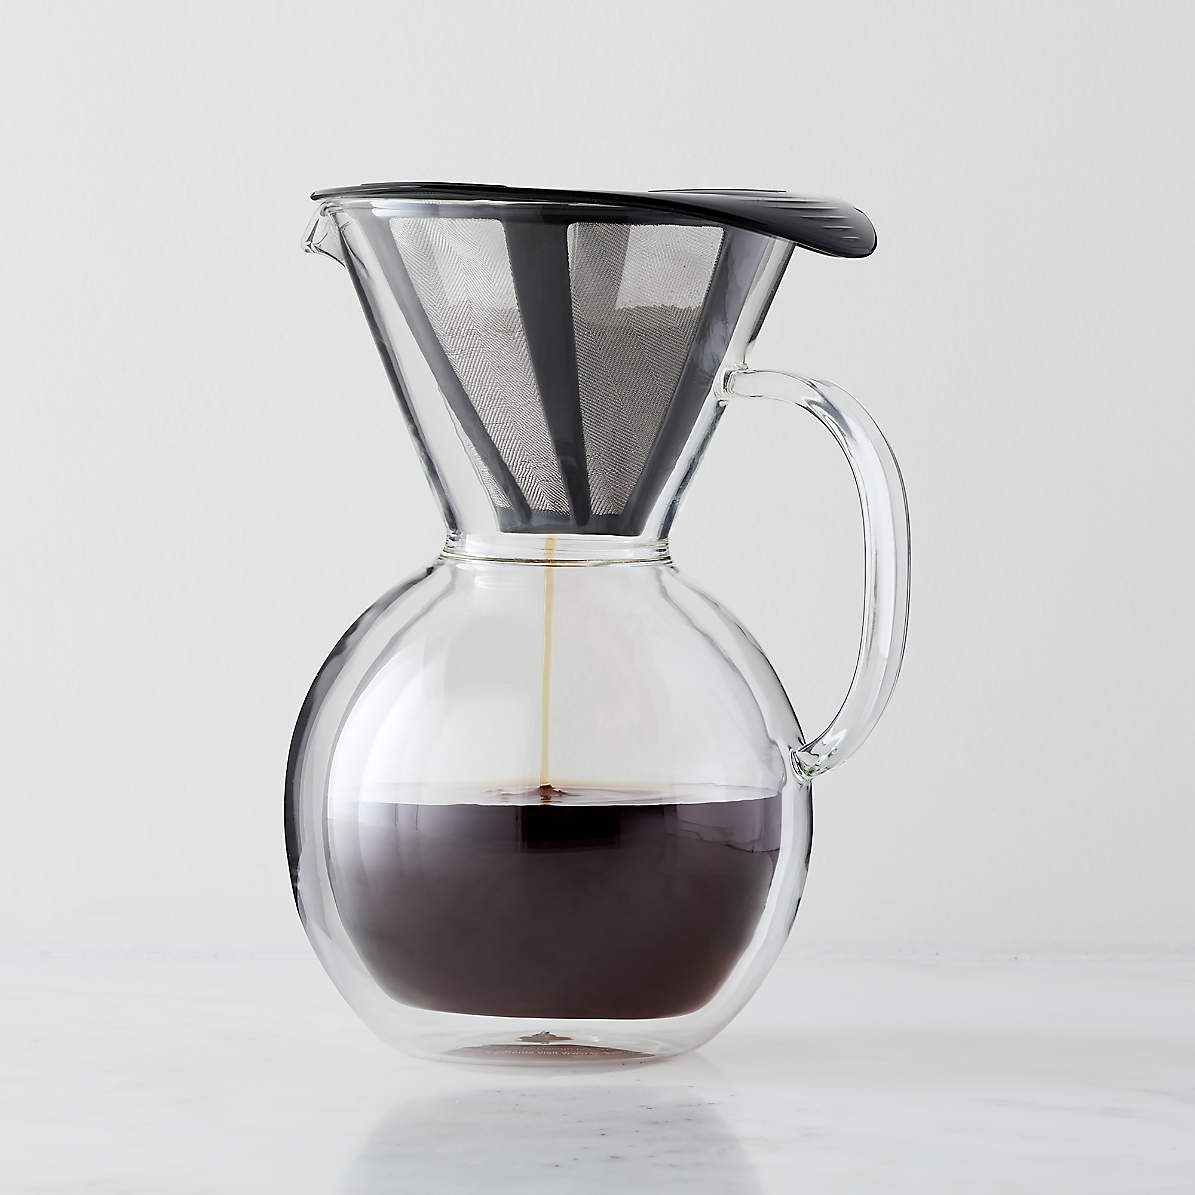 Pour Over Coffee Maker 20 oz,Pour Over Coffee Dripper Glass Carafe,Pour Over Coffee Maker with Handle,Pour Over Coffee Maker with Borosilicate Glass Carafe